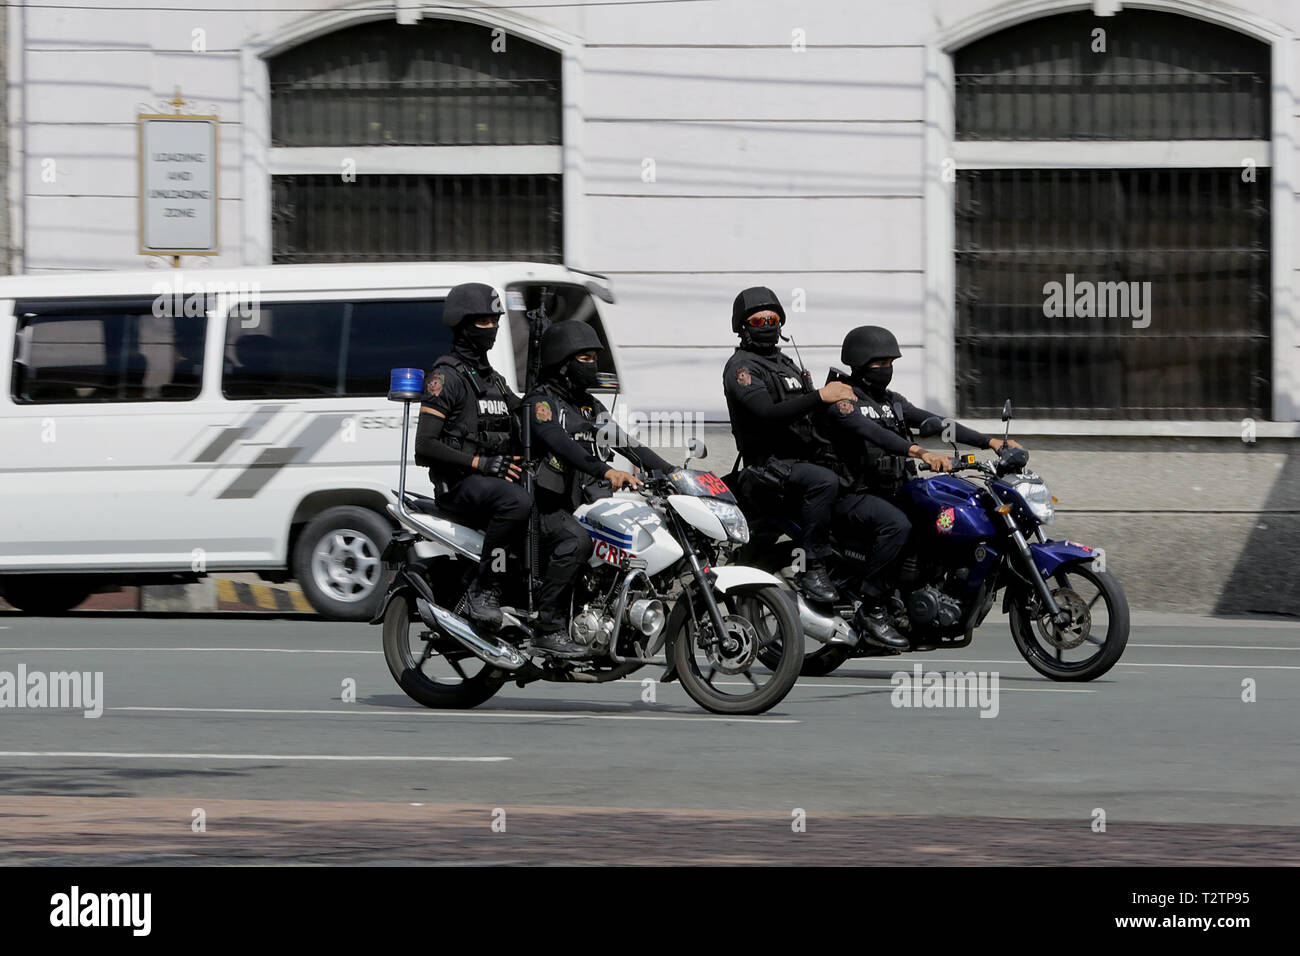 Manila, Philippines. 4th Apr, 2019. Members of the Philippine National Police's Special Weapons and Tactics (PNP-SWAT) participate in an anti-terrorism drill in Manila, the Philippines, April 4, 2019. Philippine security forces have tightened security after Wednesday's blast in southern Philippine Isulan town in Sultan Kudarat province that wounded 18 people at least, a military general said on Thursday. Credit: Rouelle Umali/Xinhua/Alamy Live News Stock Photo